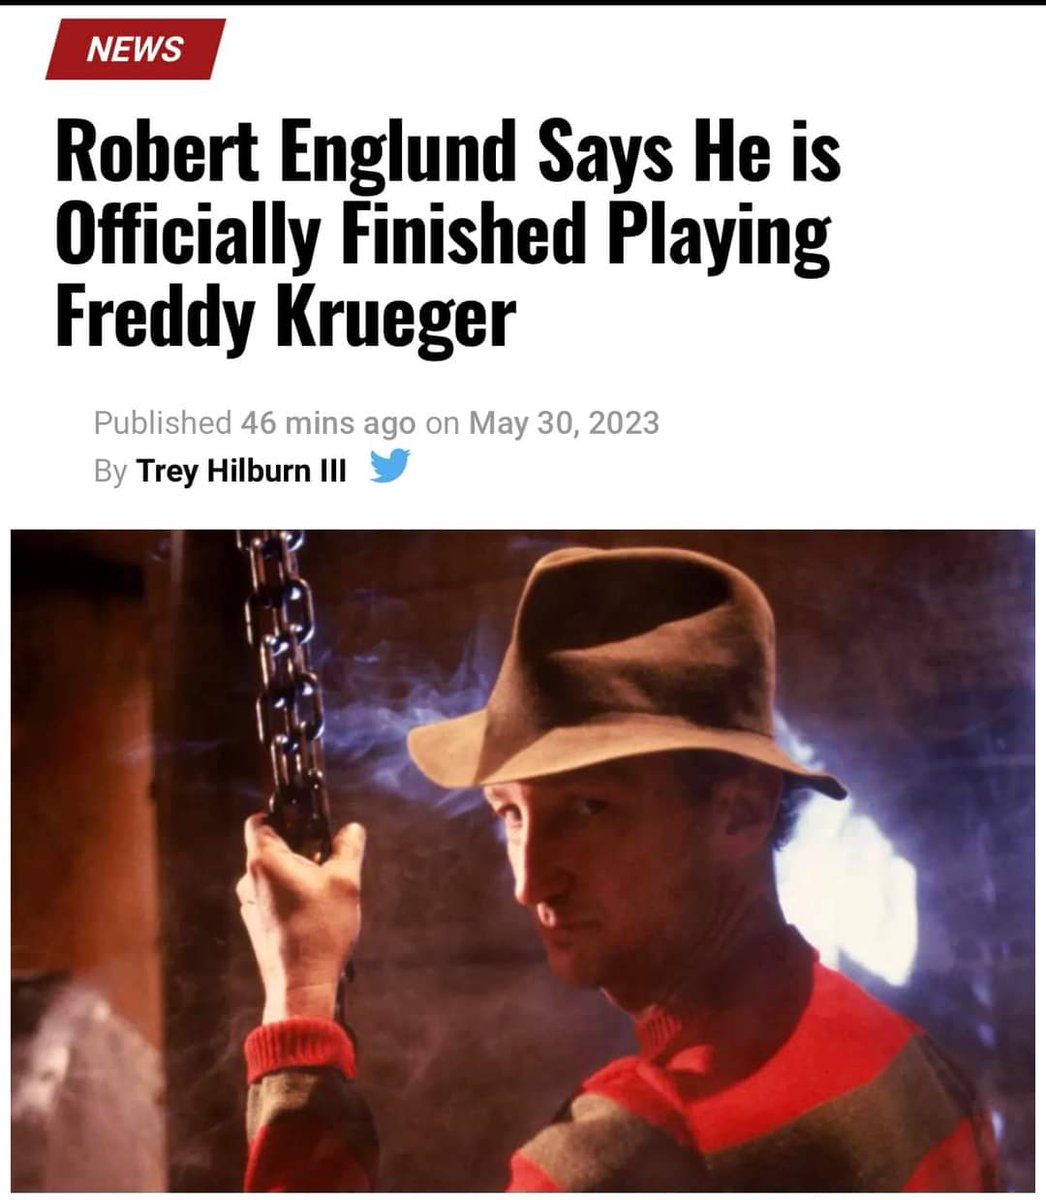 I mean we've all known this was true for years now, but still sad to see all the same 

#RobertEnglund #FreddyKruger #ANightmareonElmStreet #horror #horrorfans #HorrorFam #HorrorFamily #HorrorMovies #HorrorCommunity